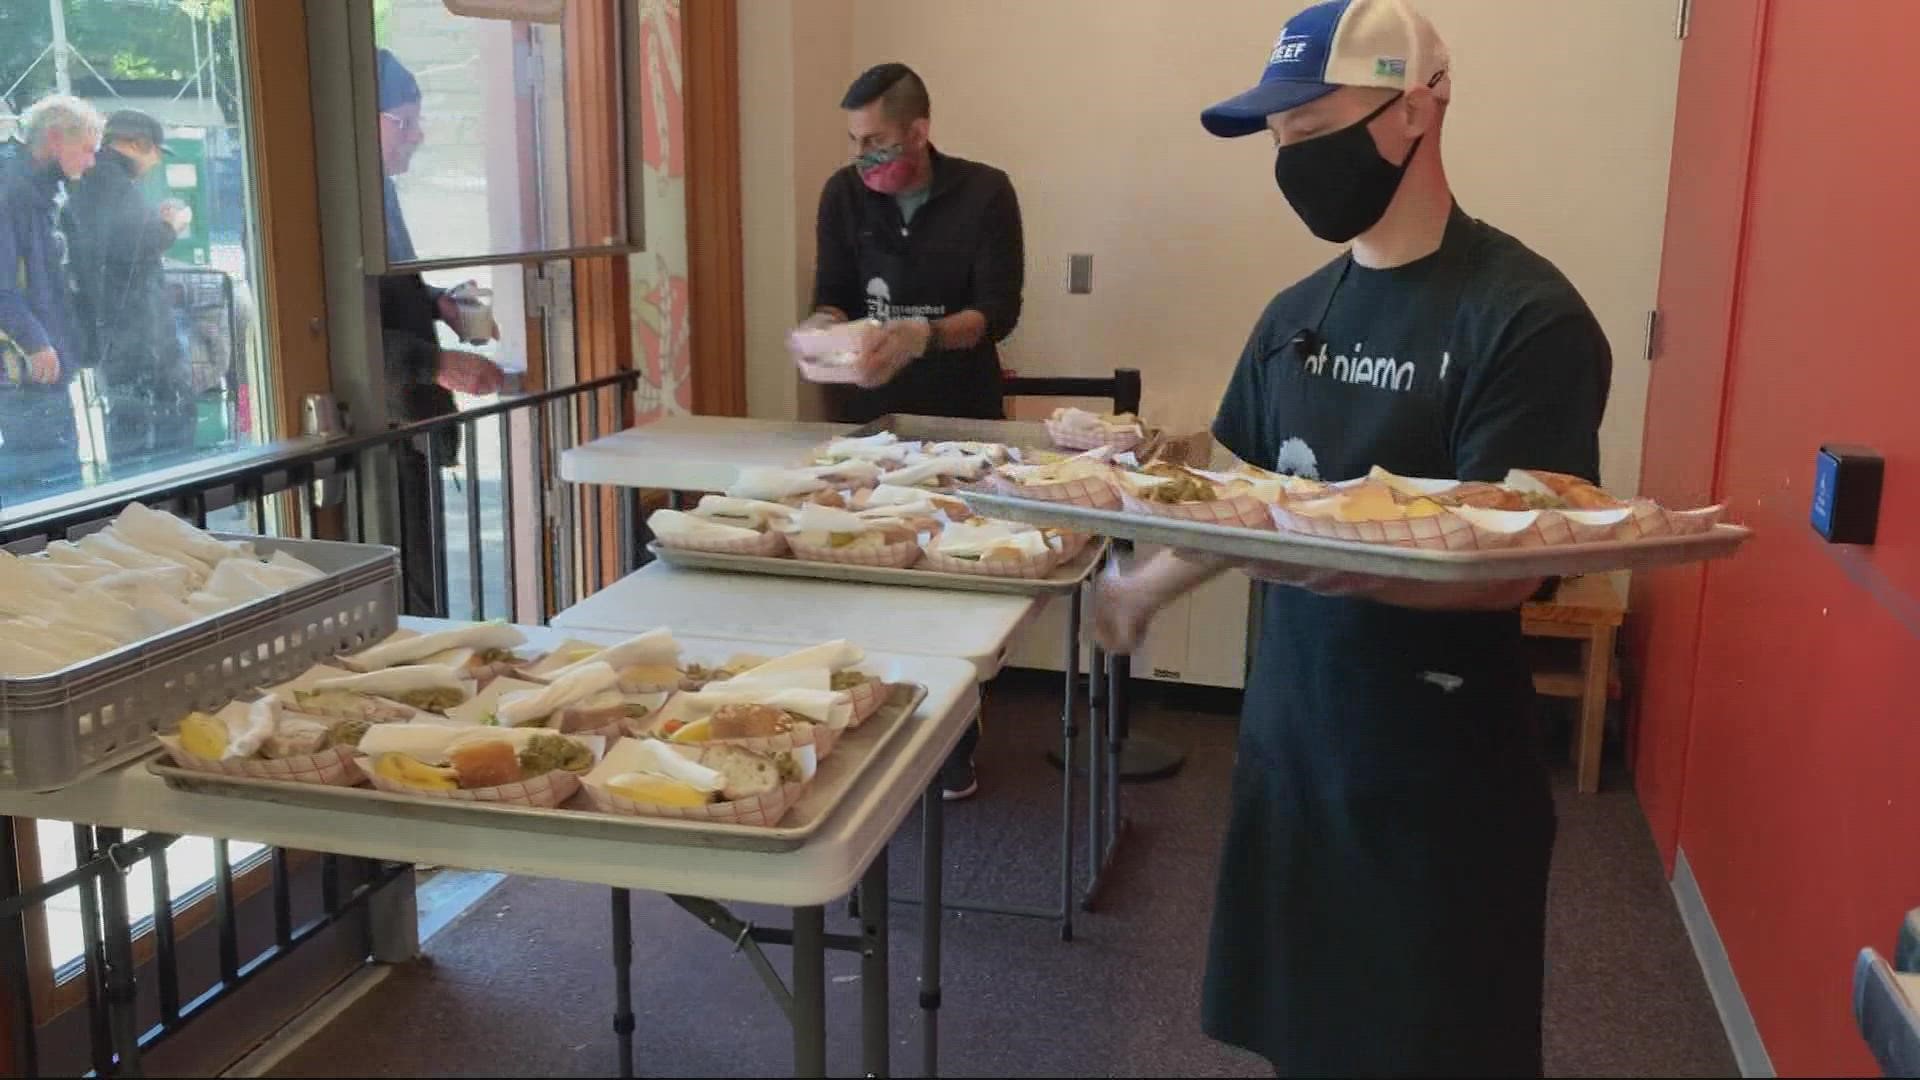 Portland nonprofit Blanchet house has been helping people in need with food, clothing and shelter for the past 70 years.